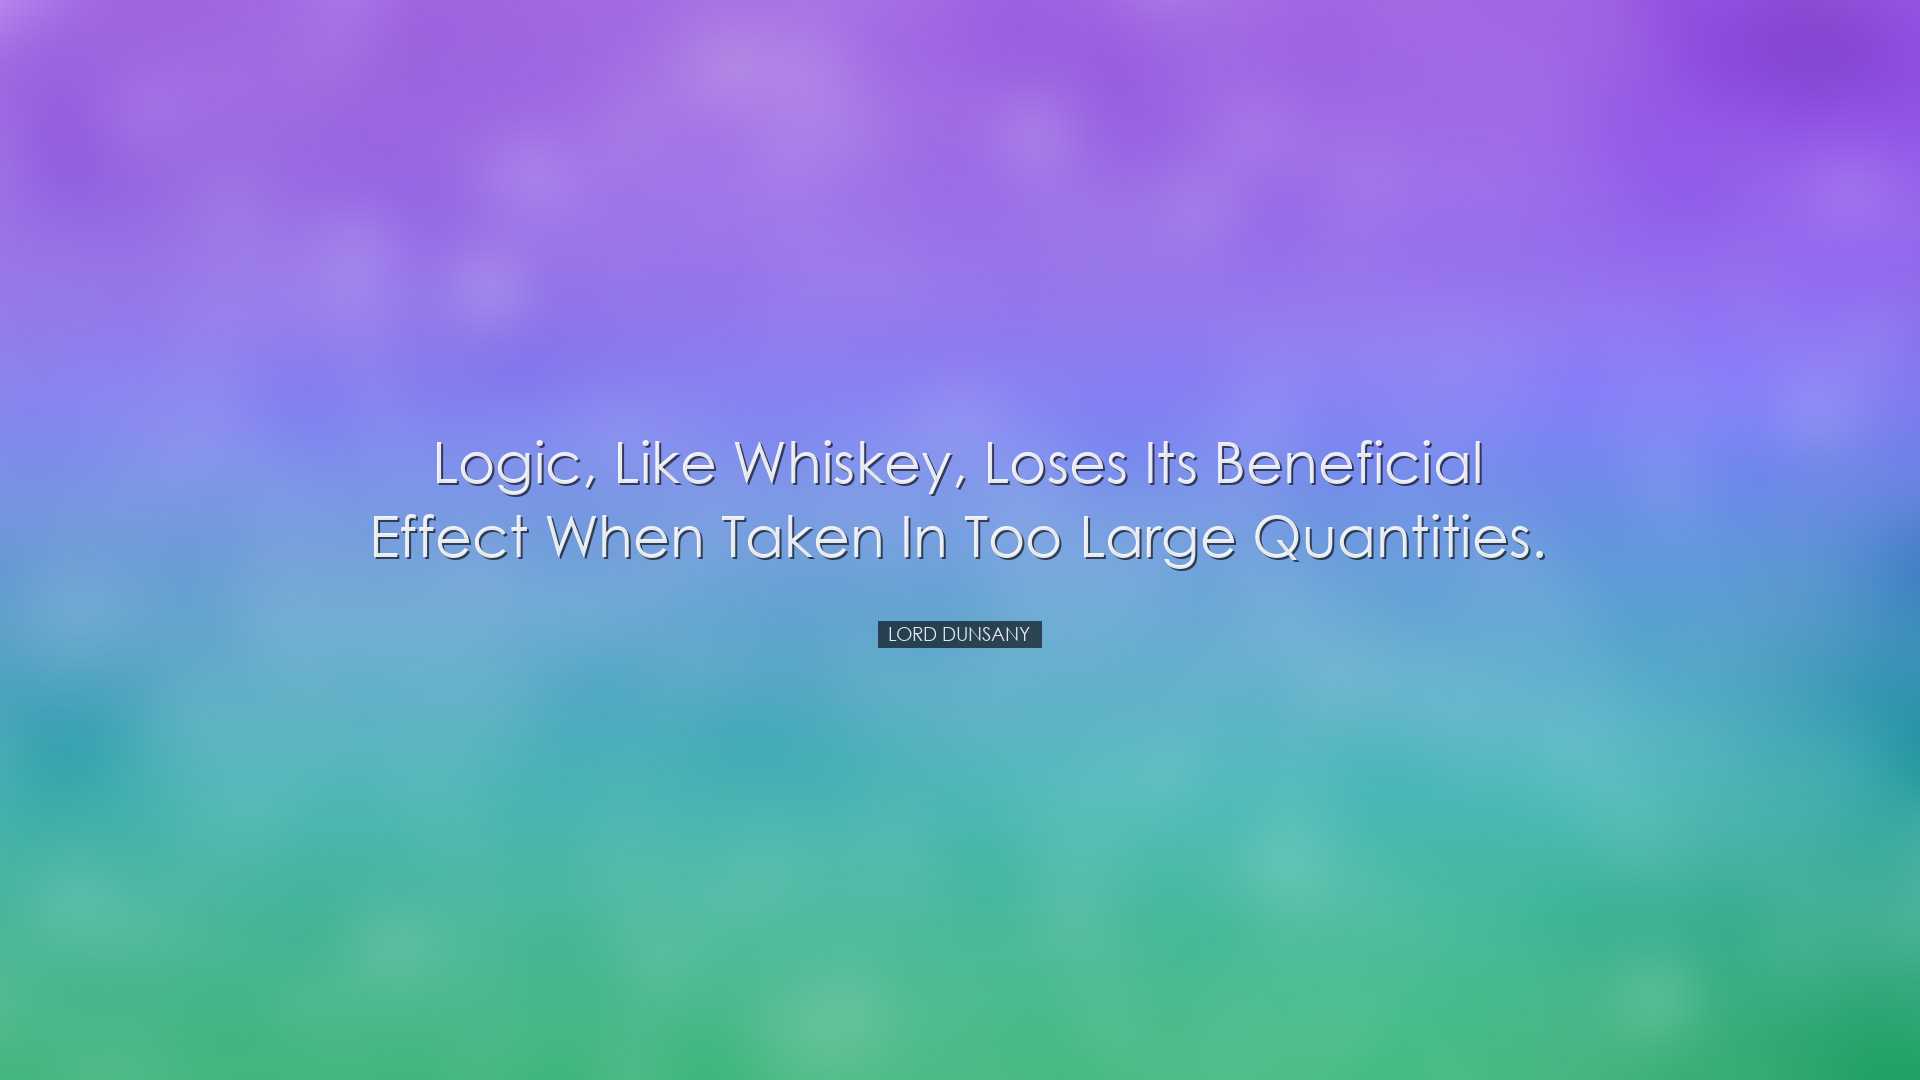 Logic, like whiskey, loses its beneficial effect when taken in too